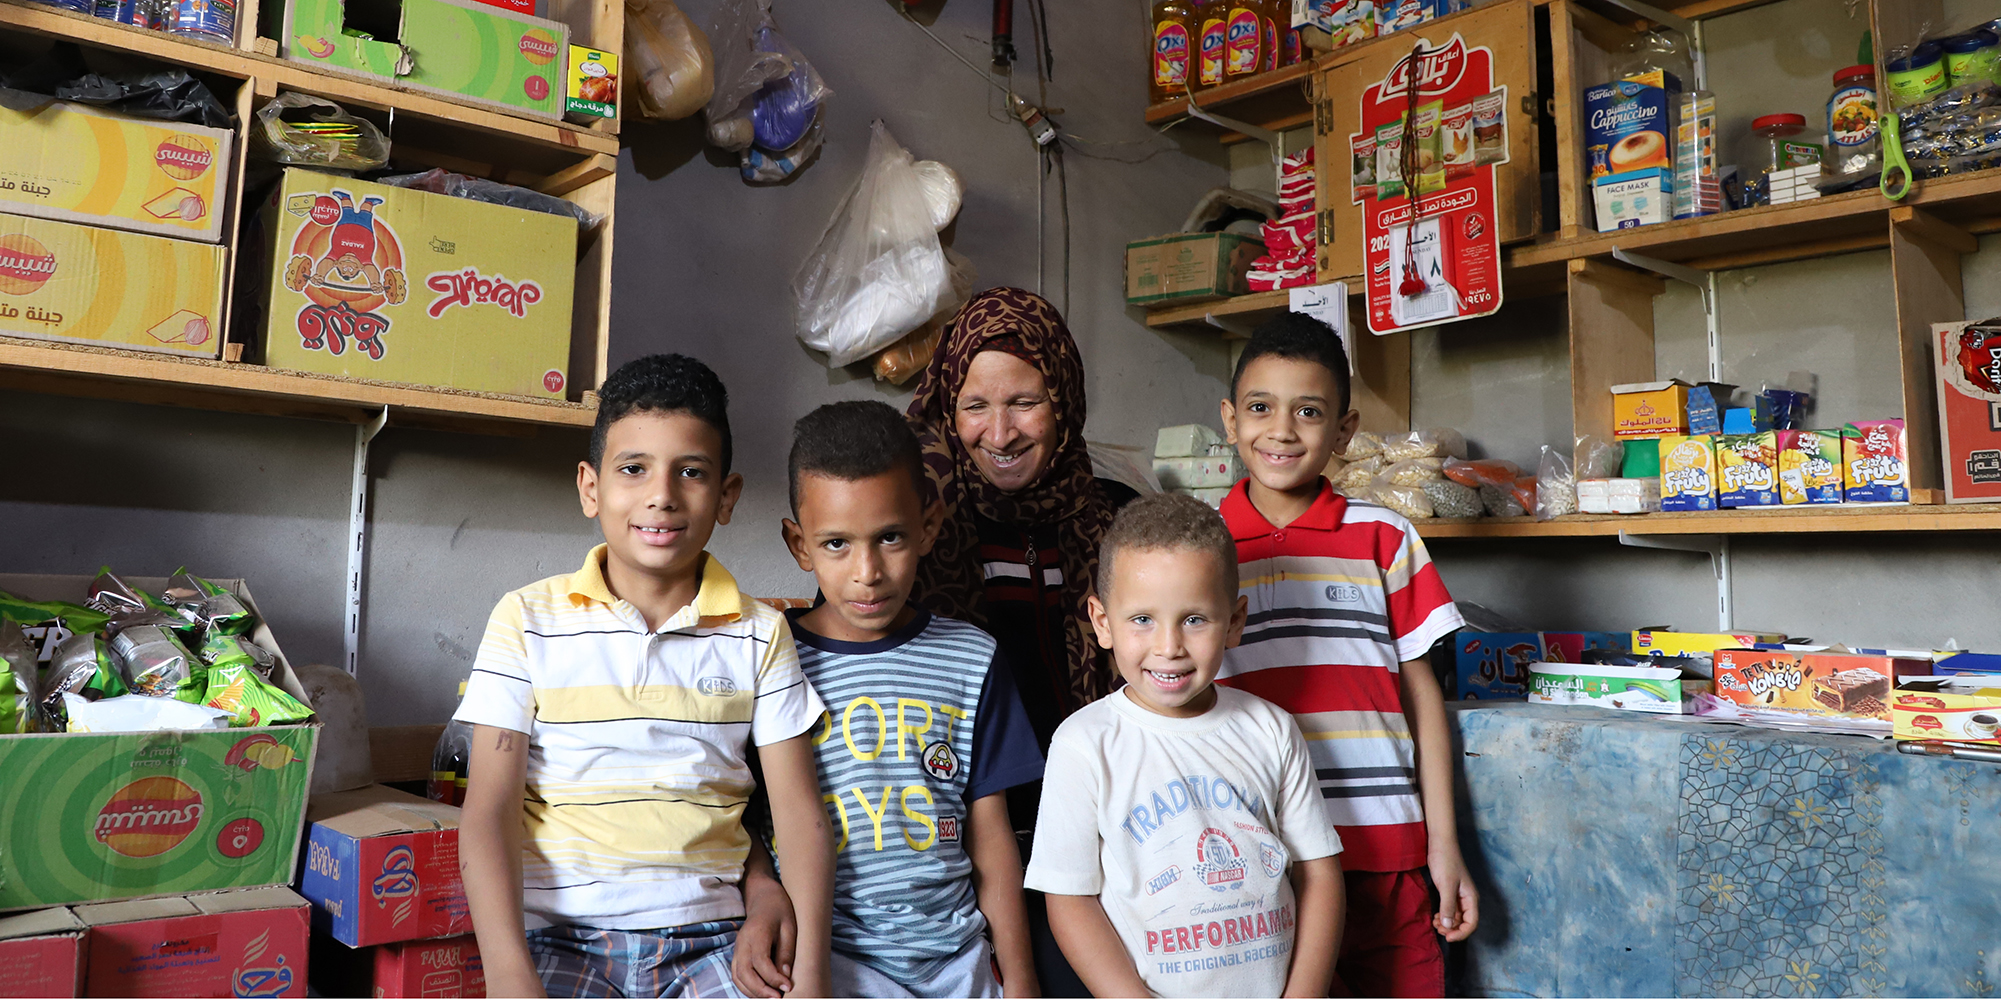 Smiling woman standing with her four boys in her storefront